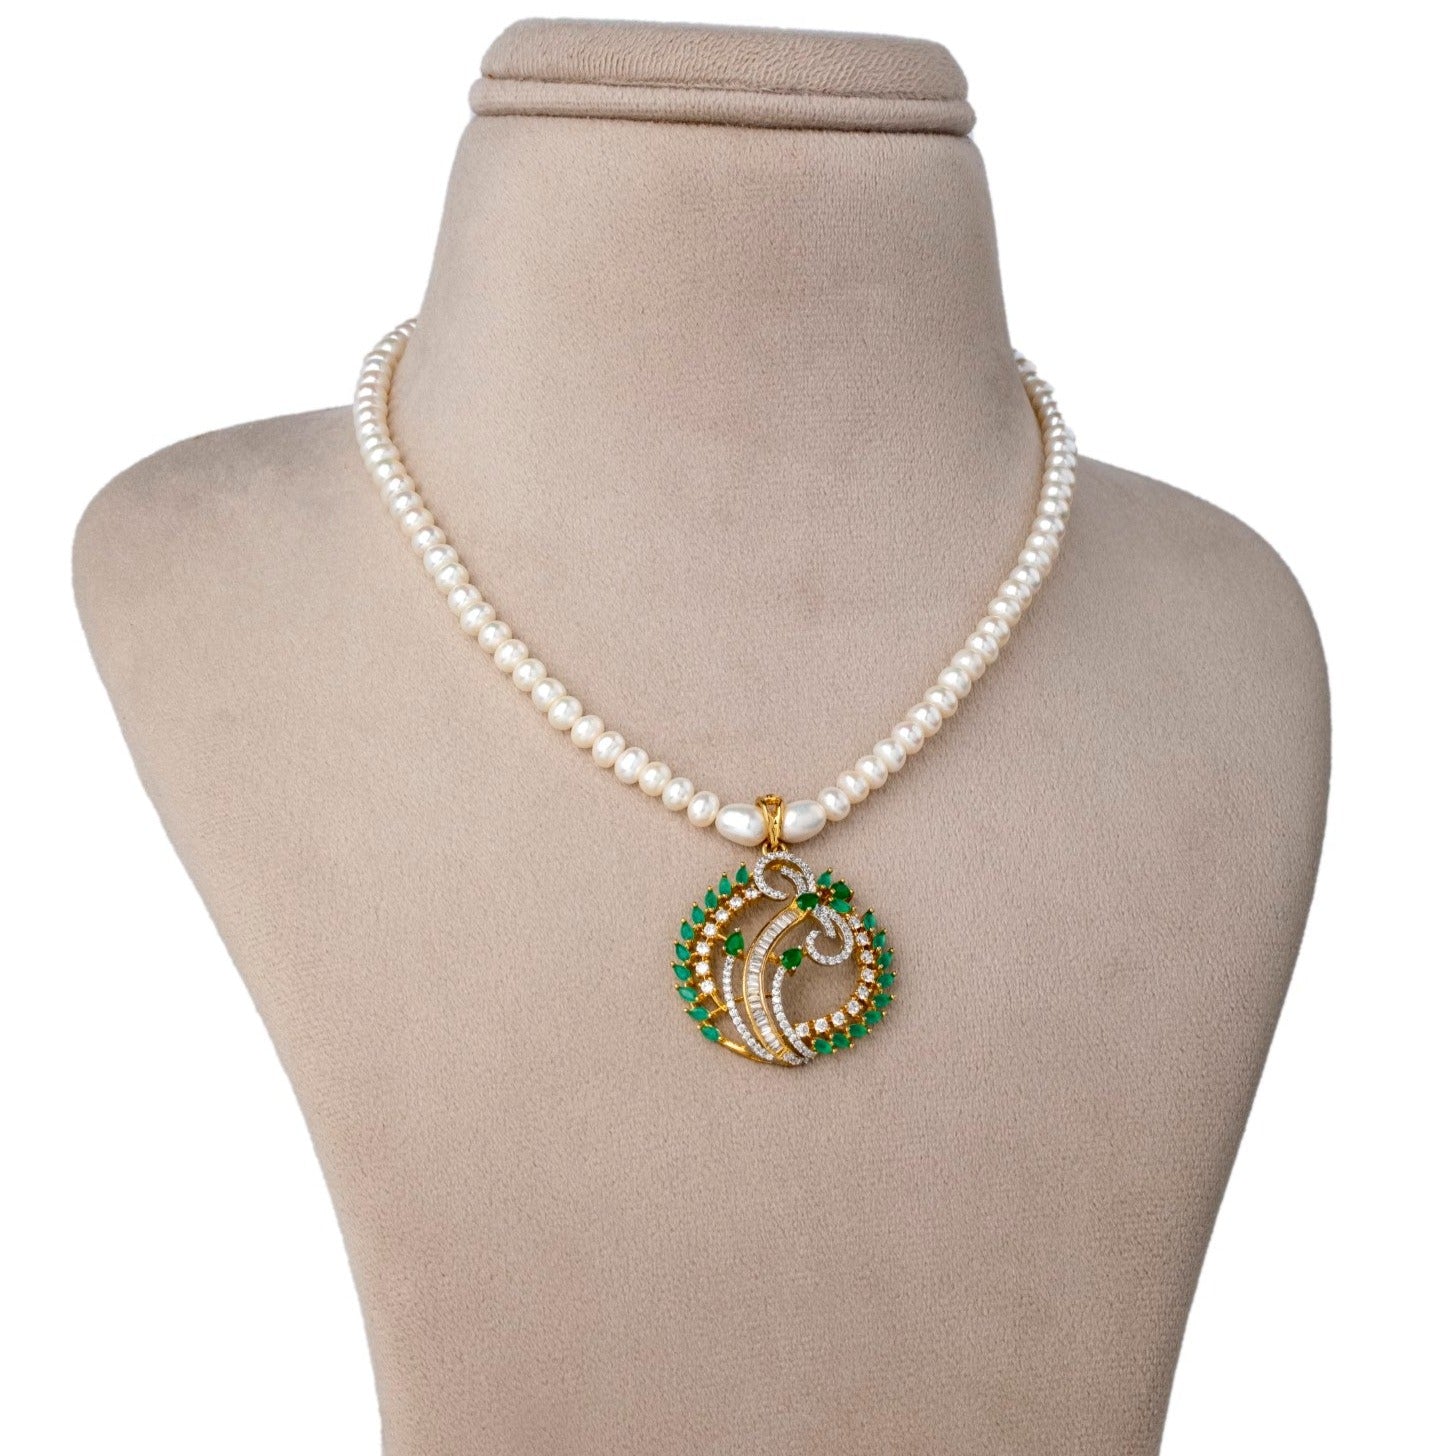 Green Splendor Pearl Necklace and Earring Set